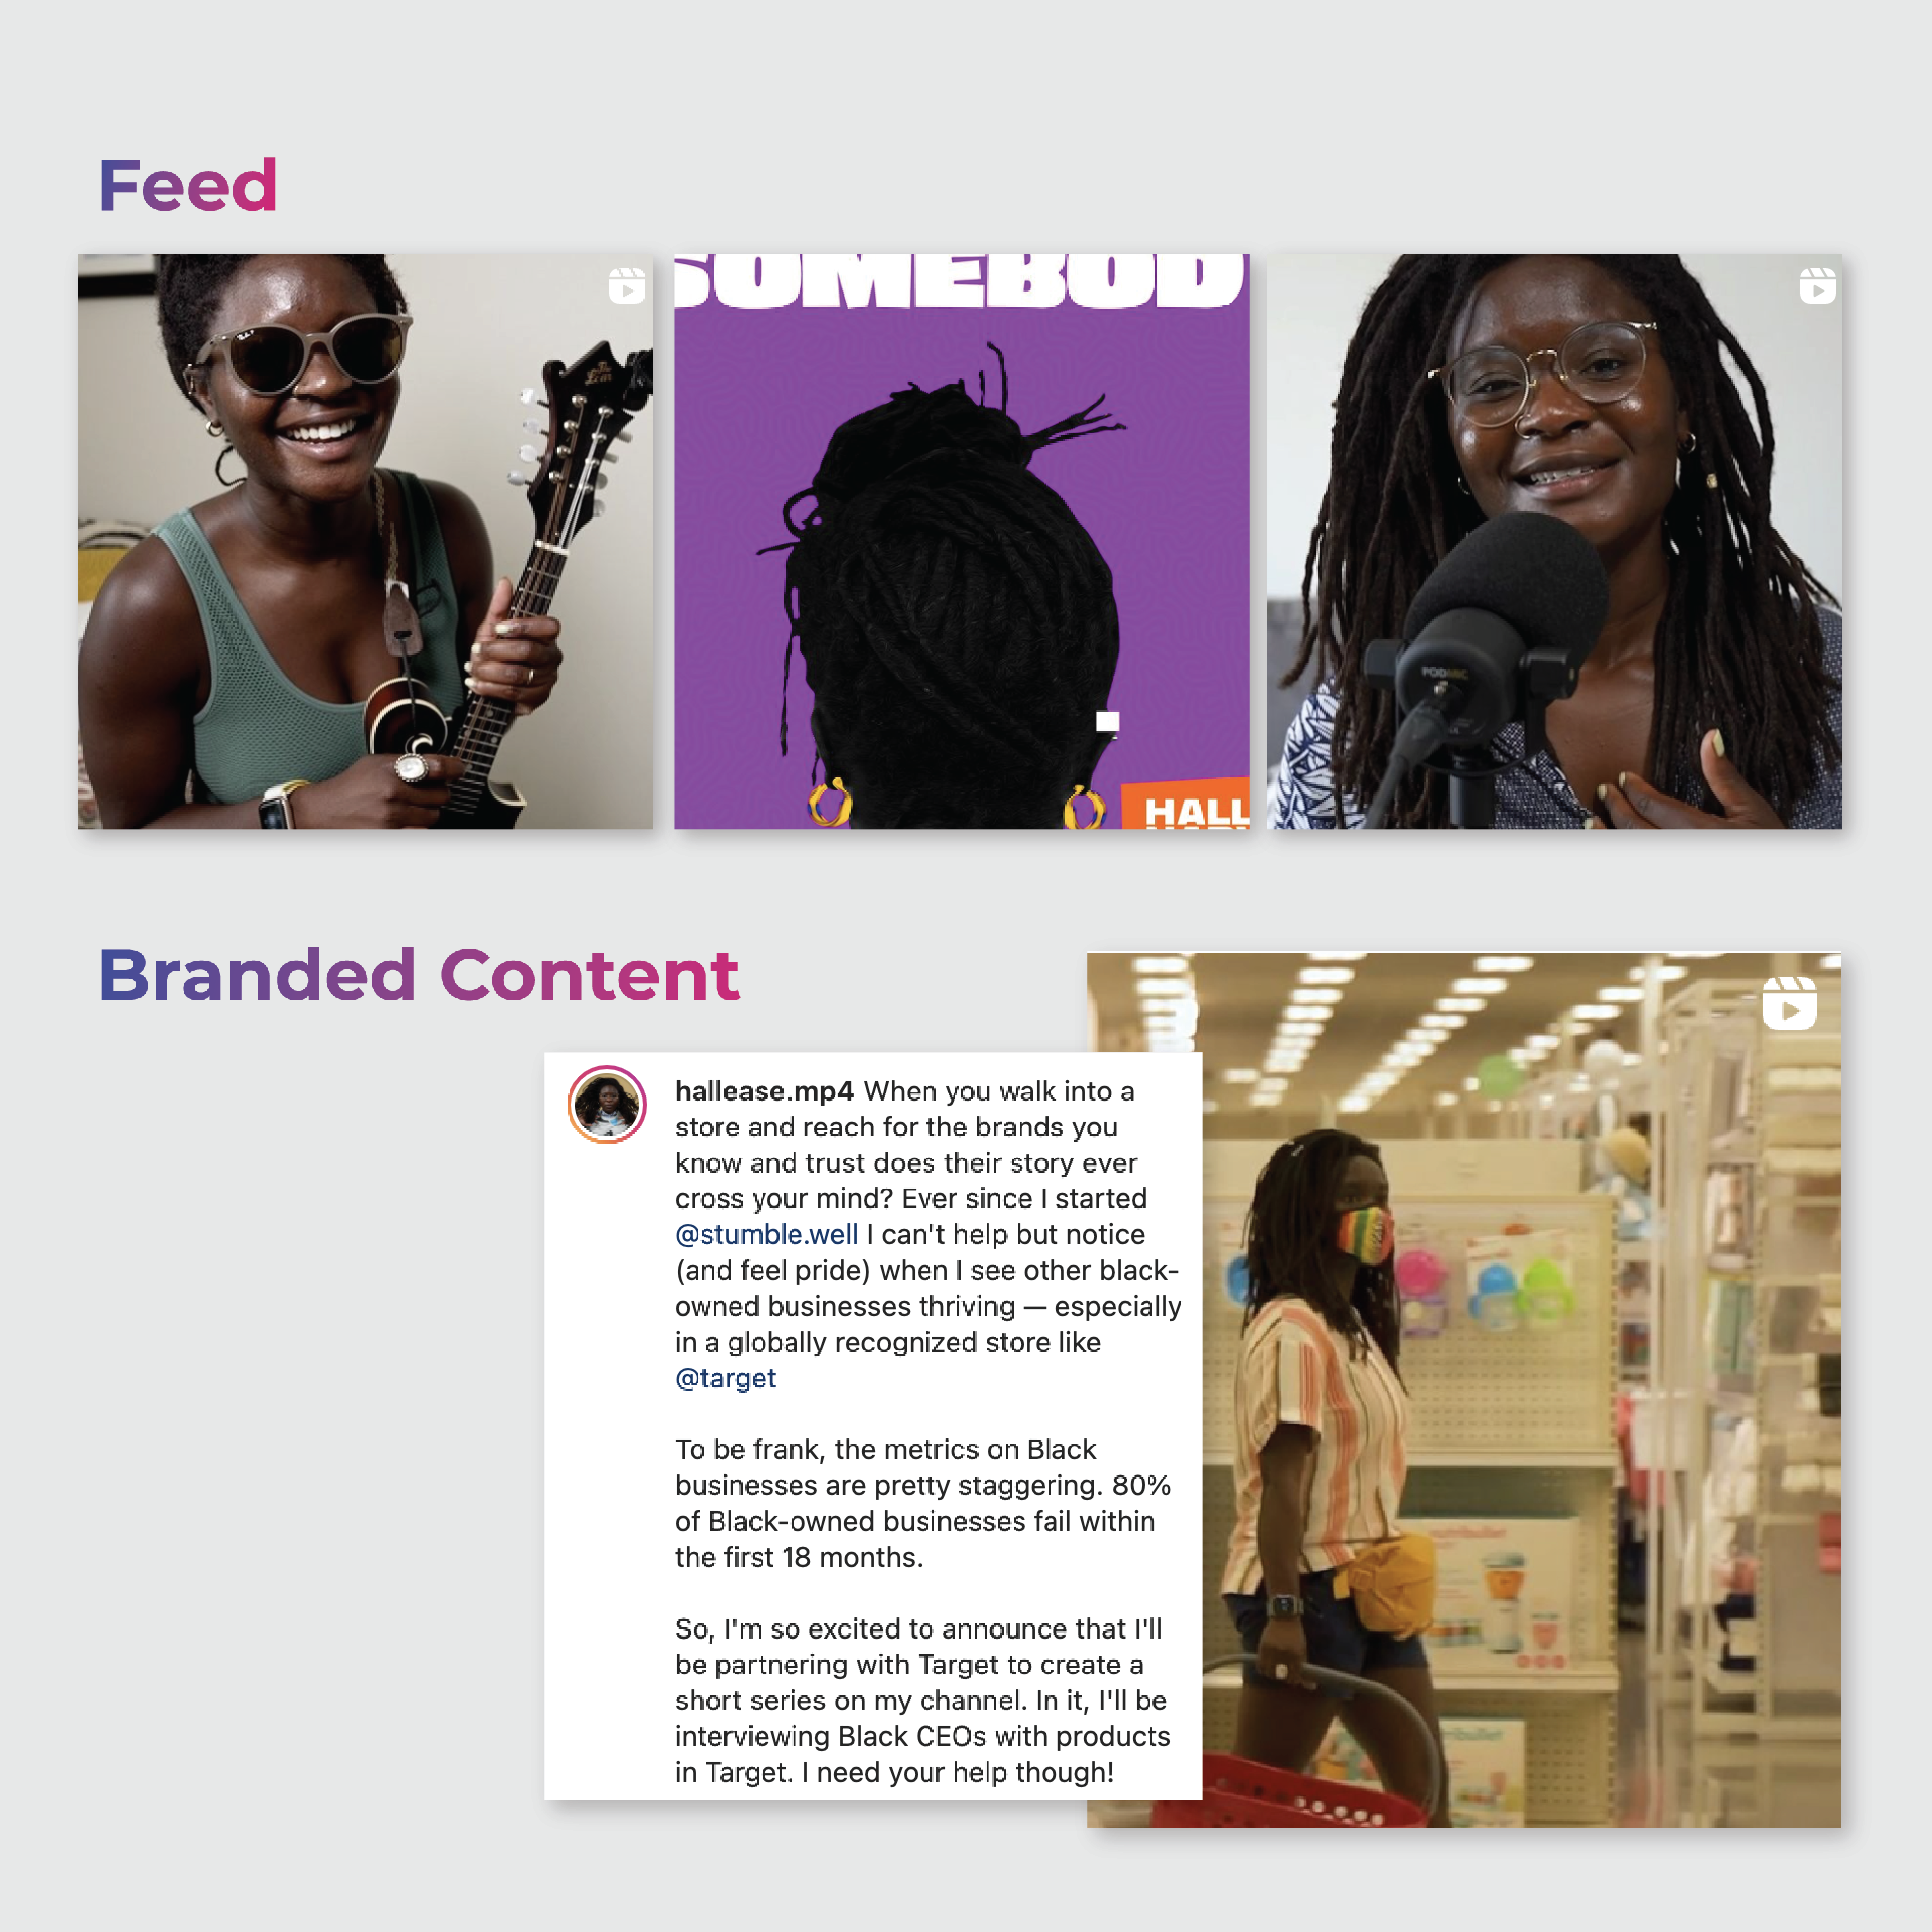 Creator spotlight featuring a talented storyteller influencers that uses video to move an audience in a marketing campaign.